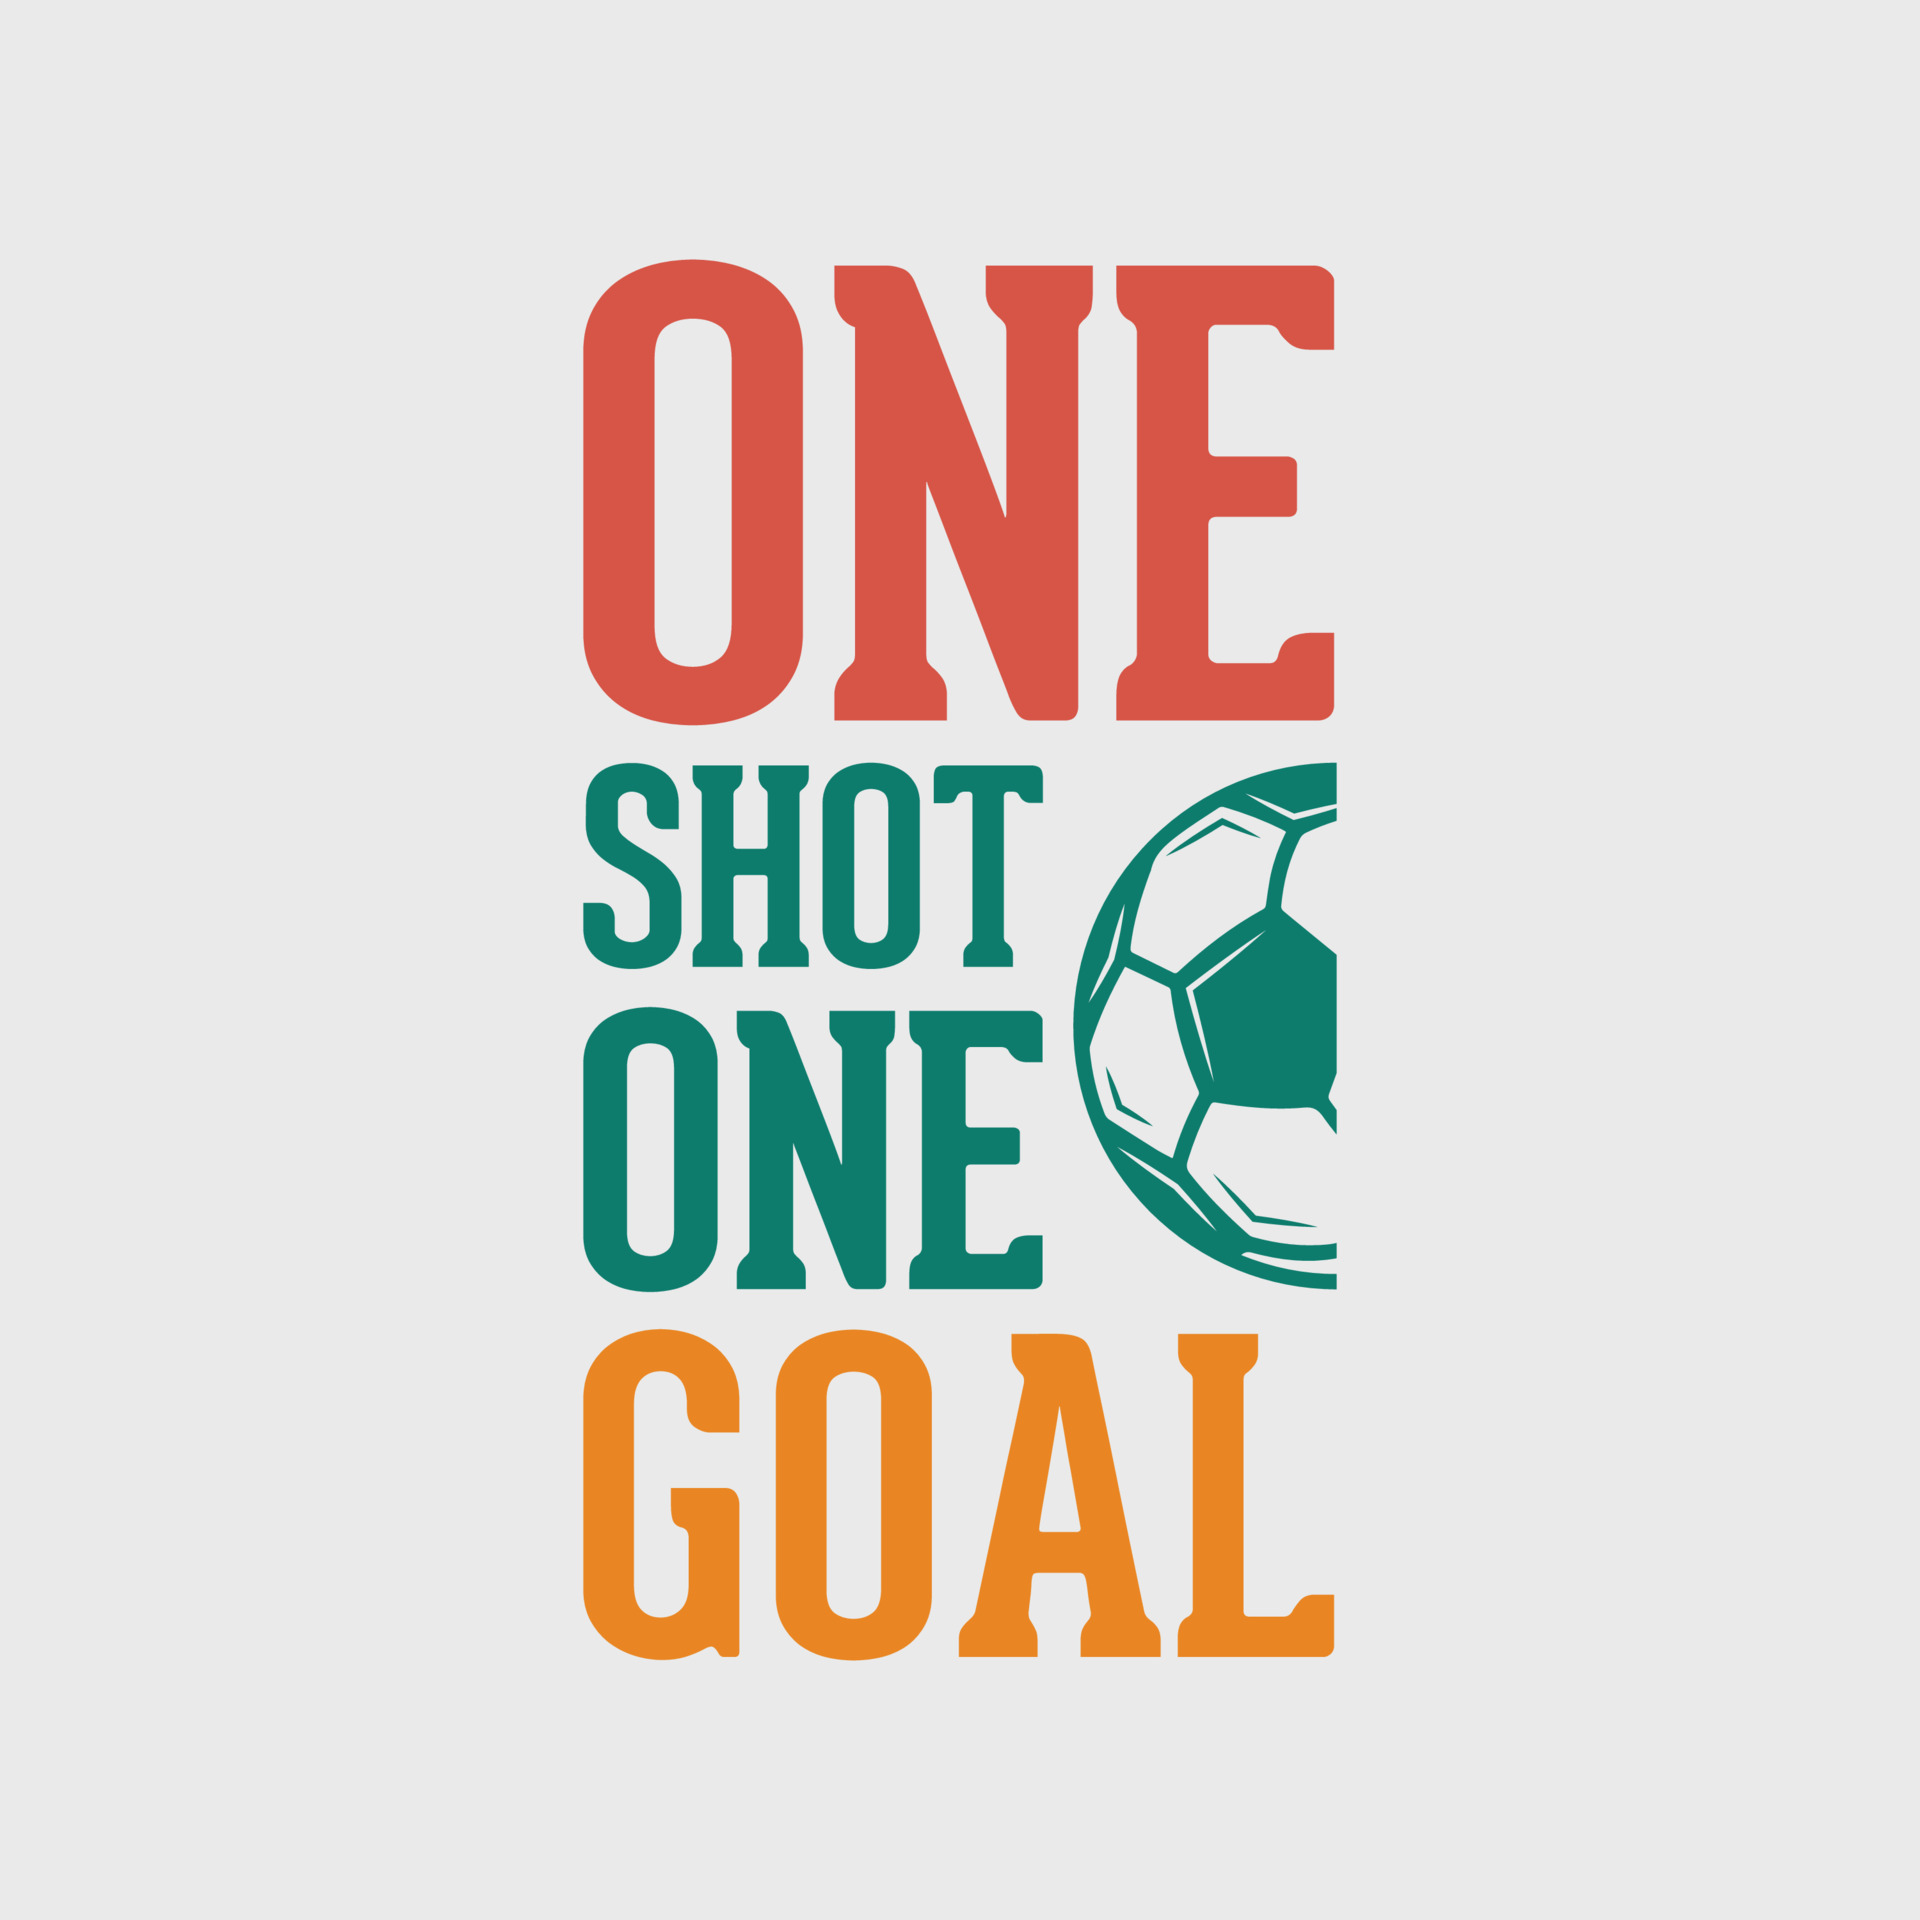 How To Turn Your Onegoalusa From Zero To Hero